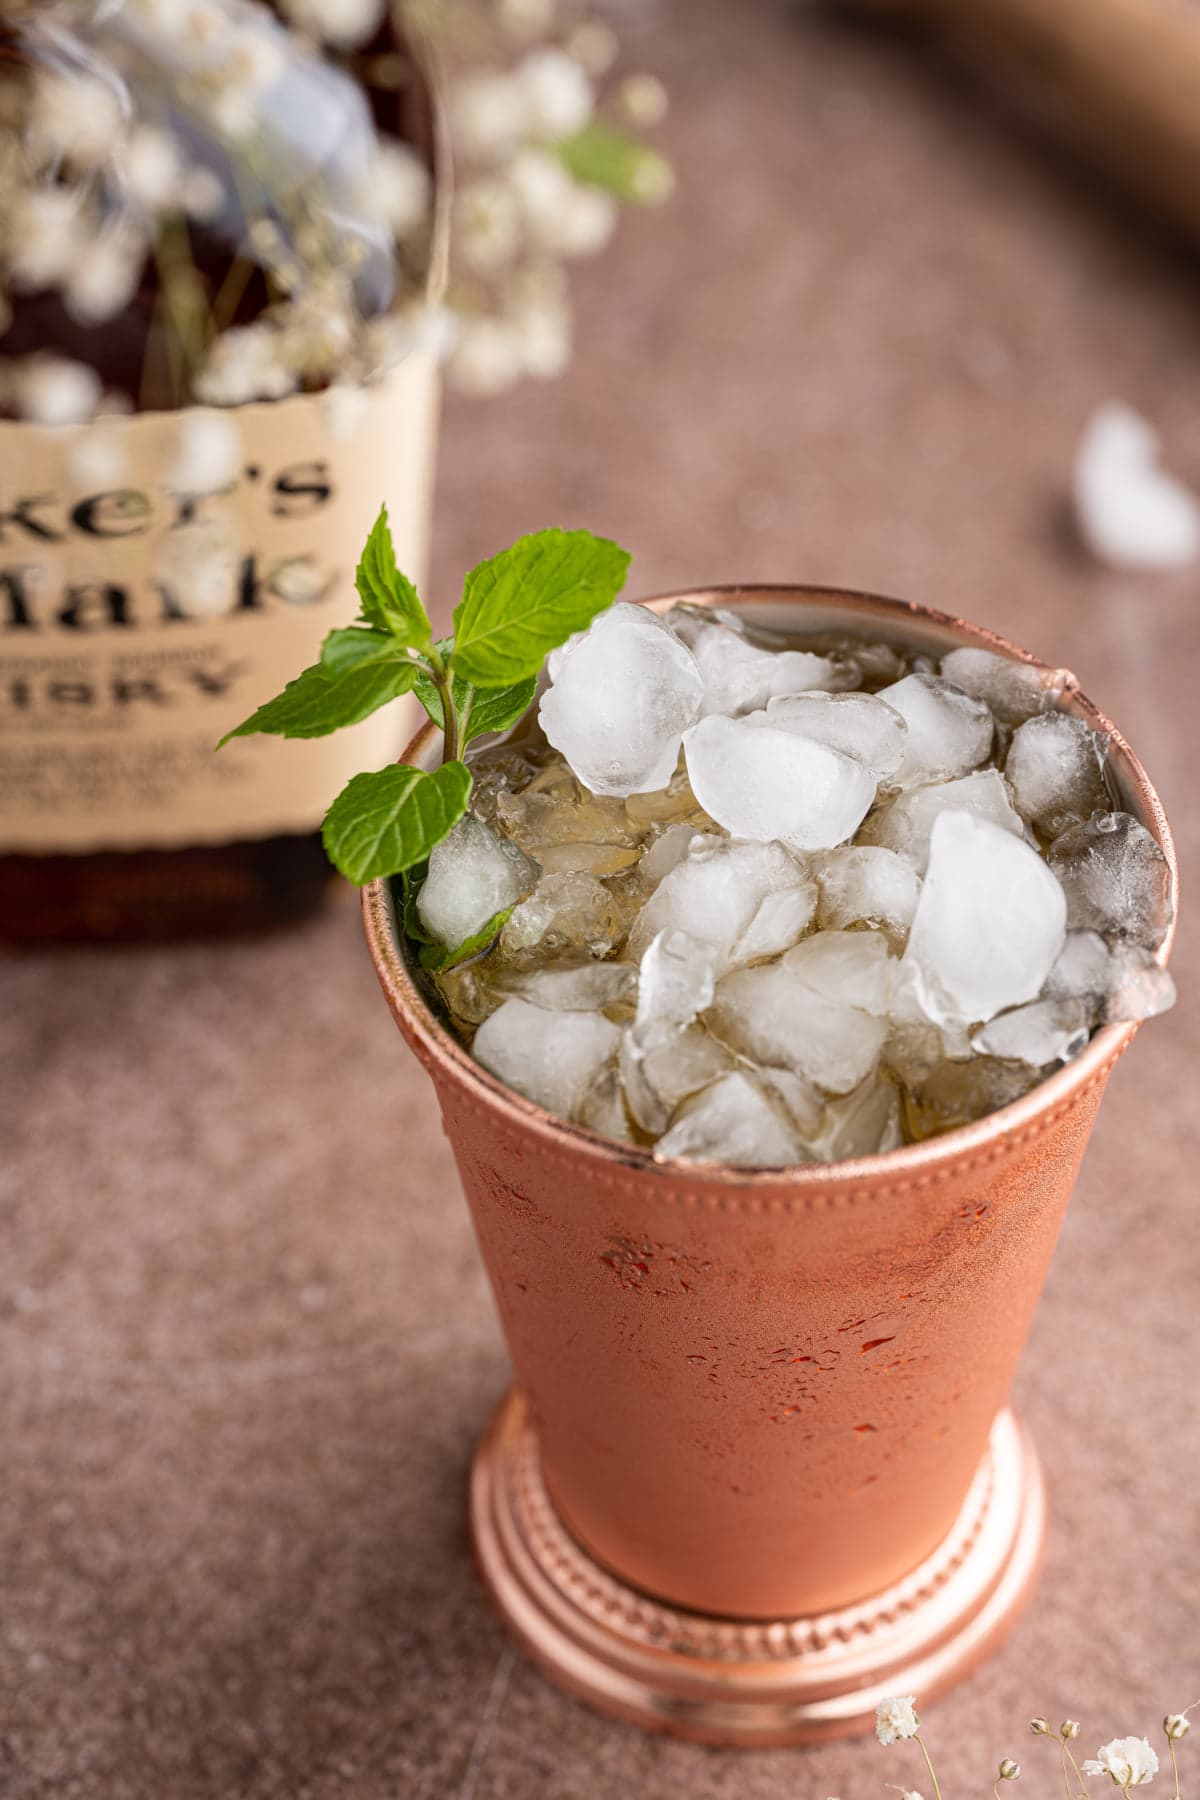 Mint Julep made with Maker's Mark Whisky